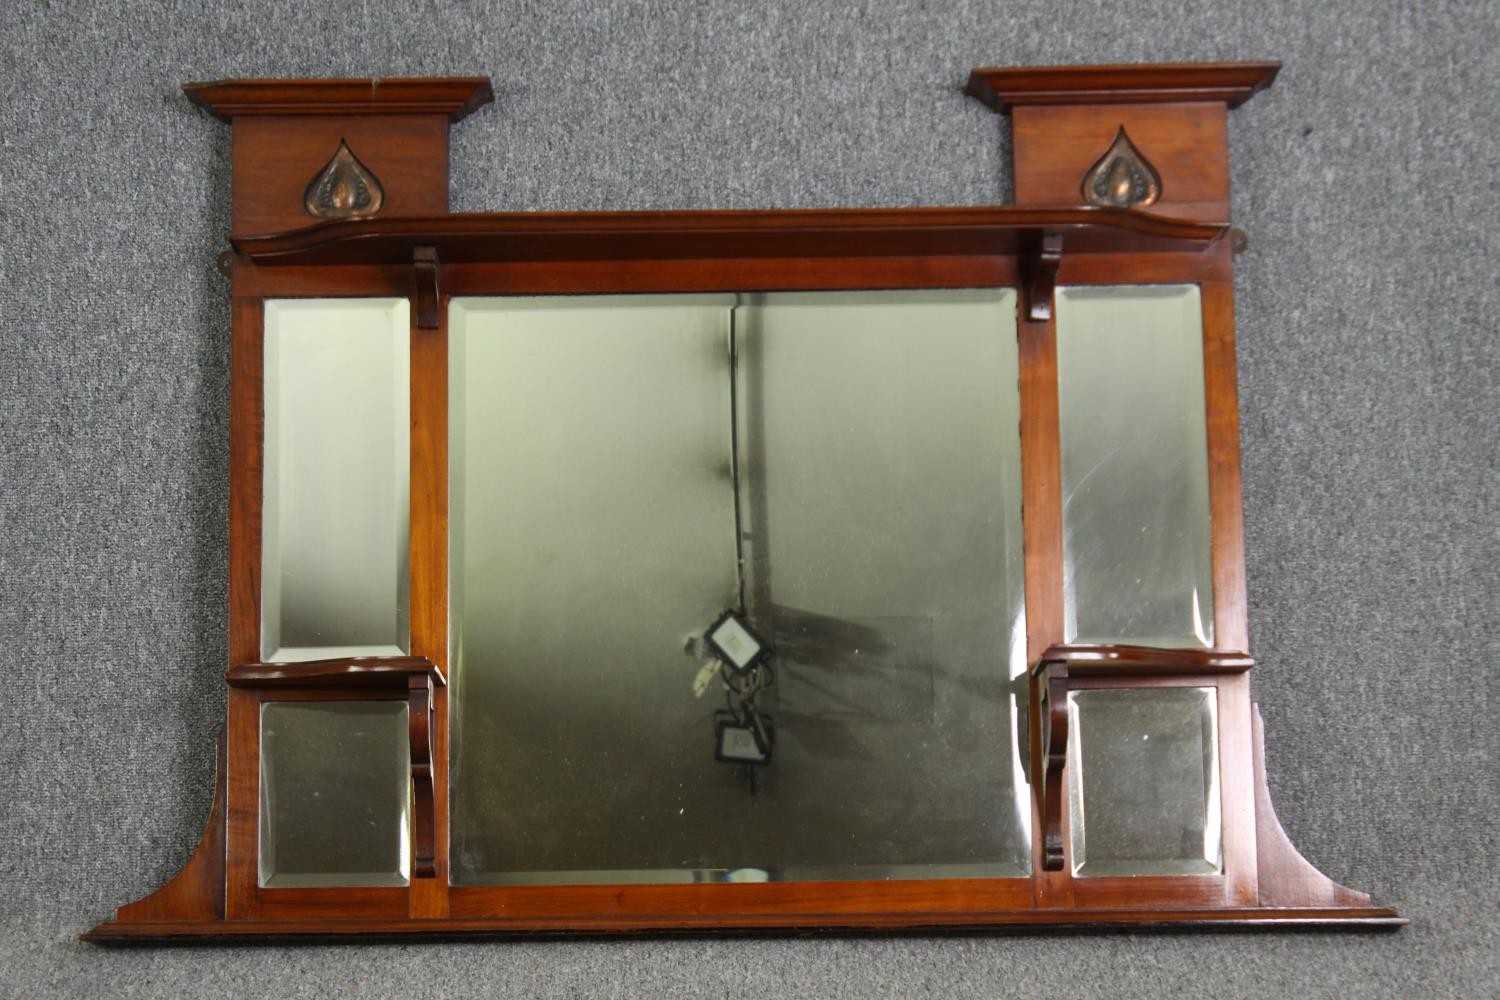 Overmantel mirror, late 19th century walnut with Art Nouveau copper inset motifs. H.84 W.122cm. - Image 6 of 7